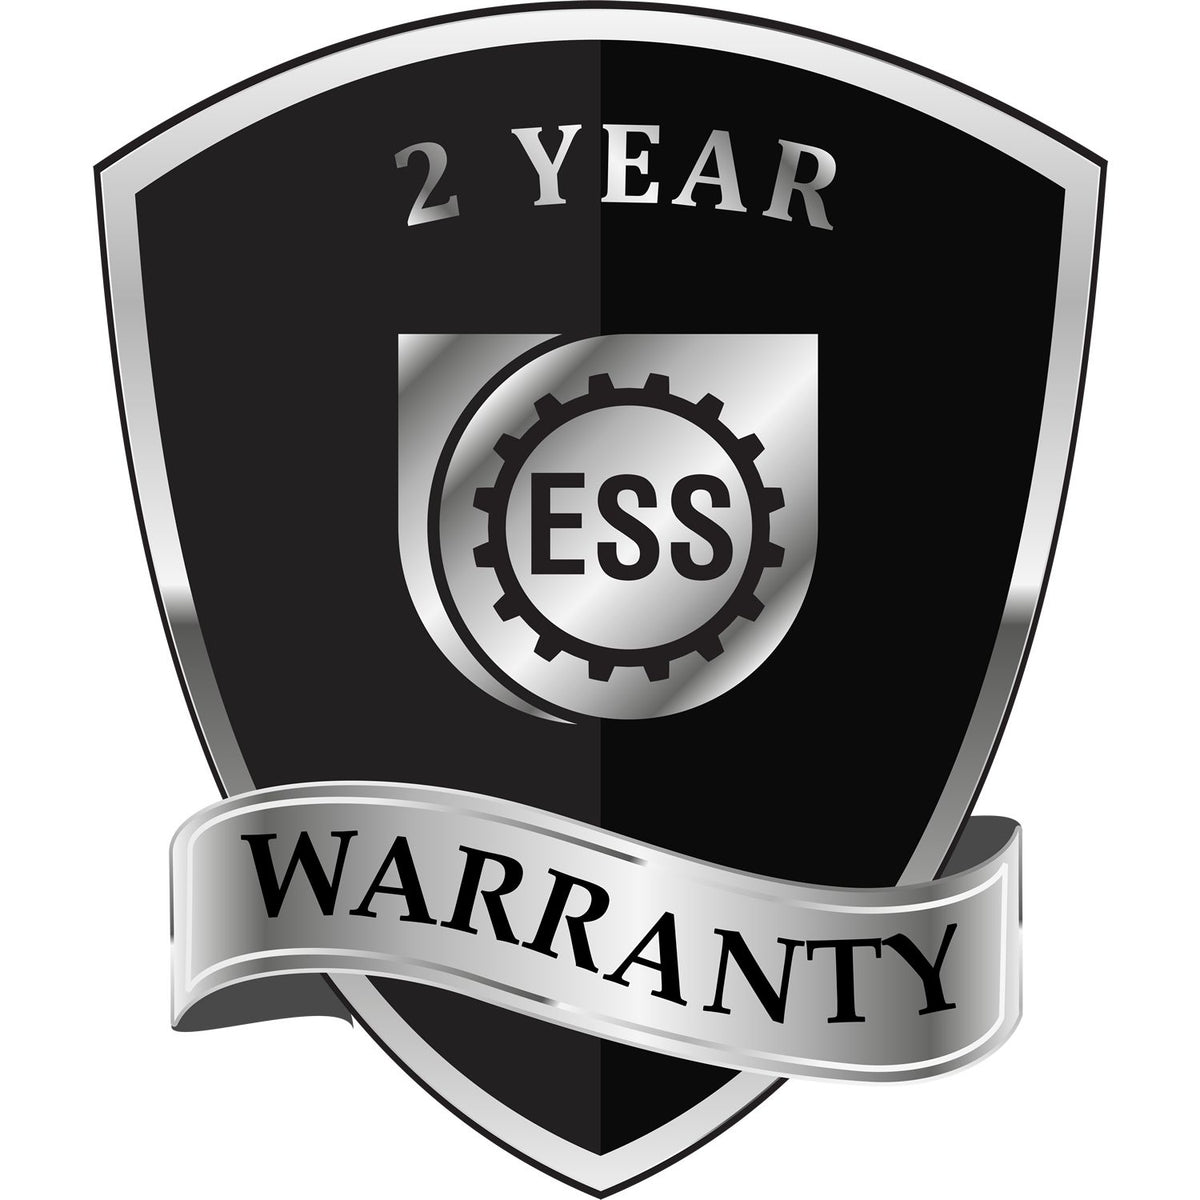 A badge or emblem showing a warranty icon for the Heavy Duty Cast Iron Indiana Land Surveyor Seal Embosser